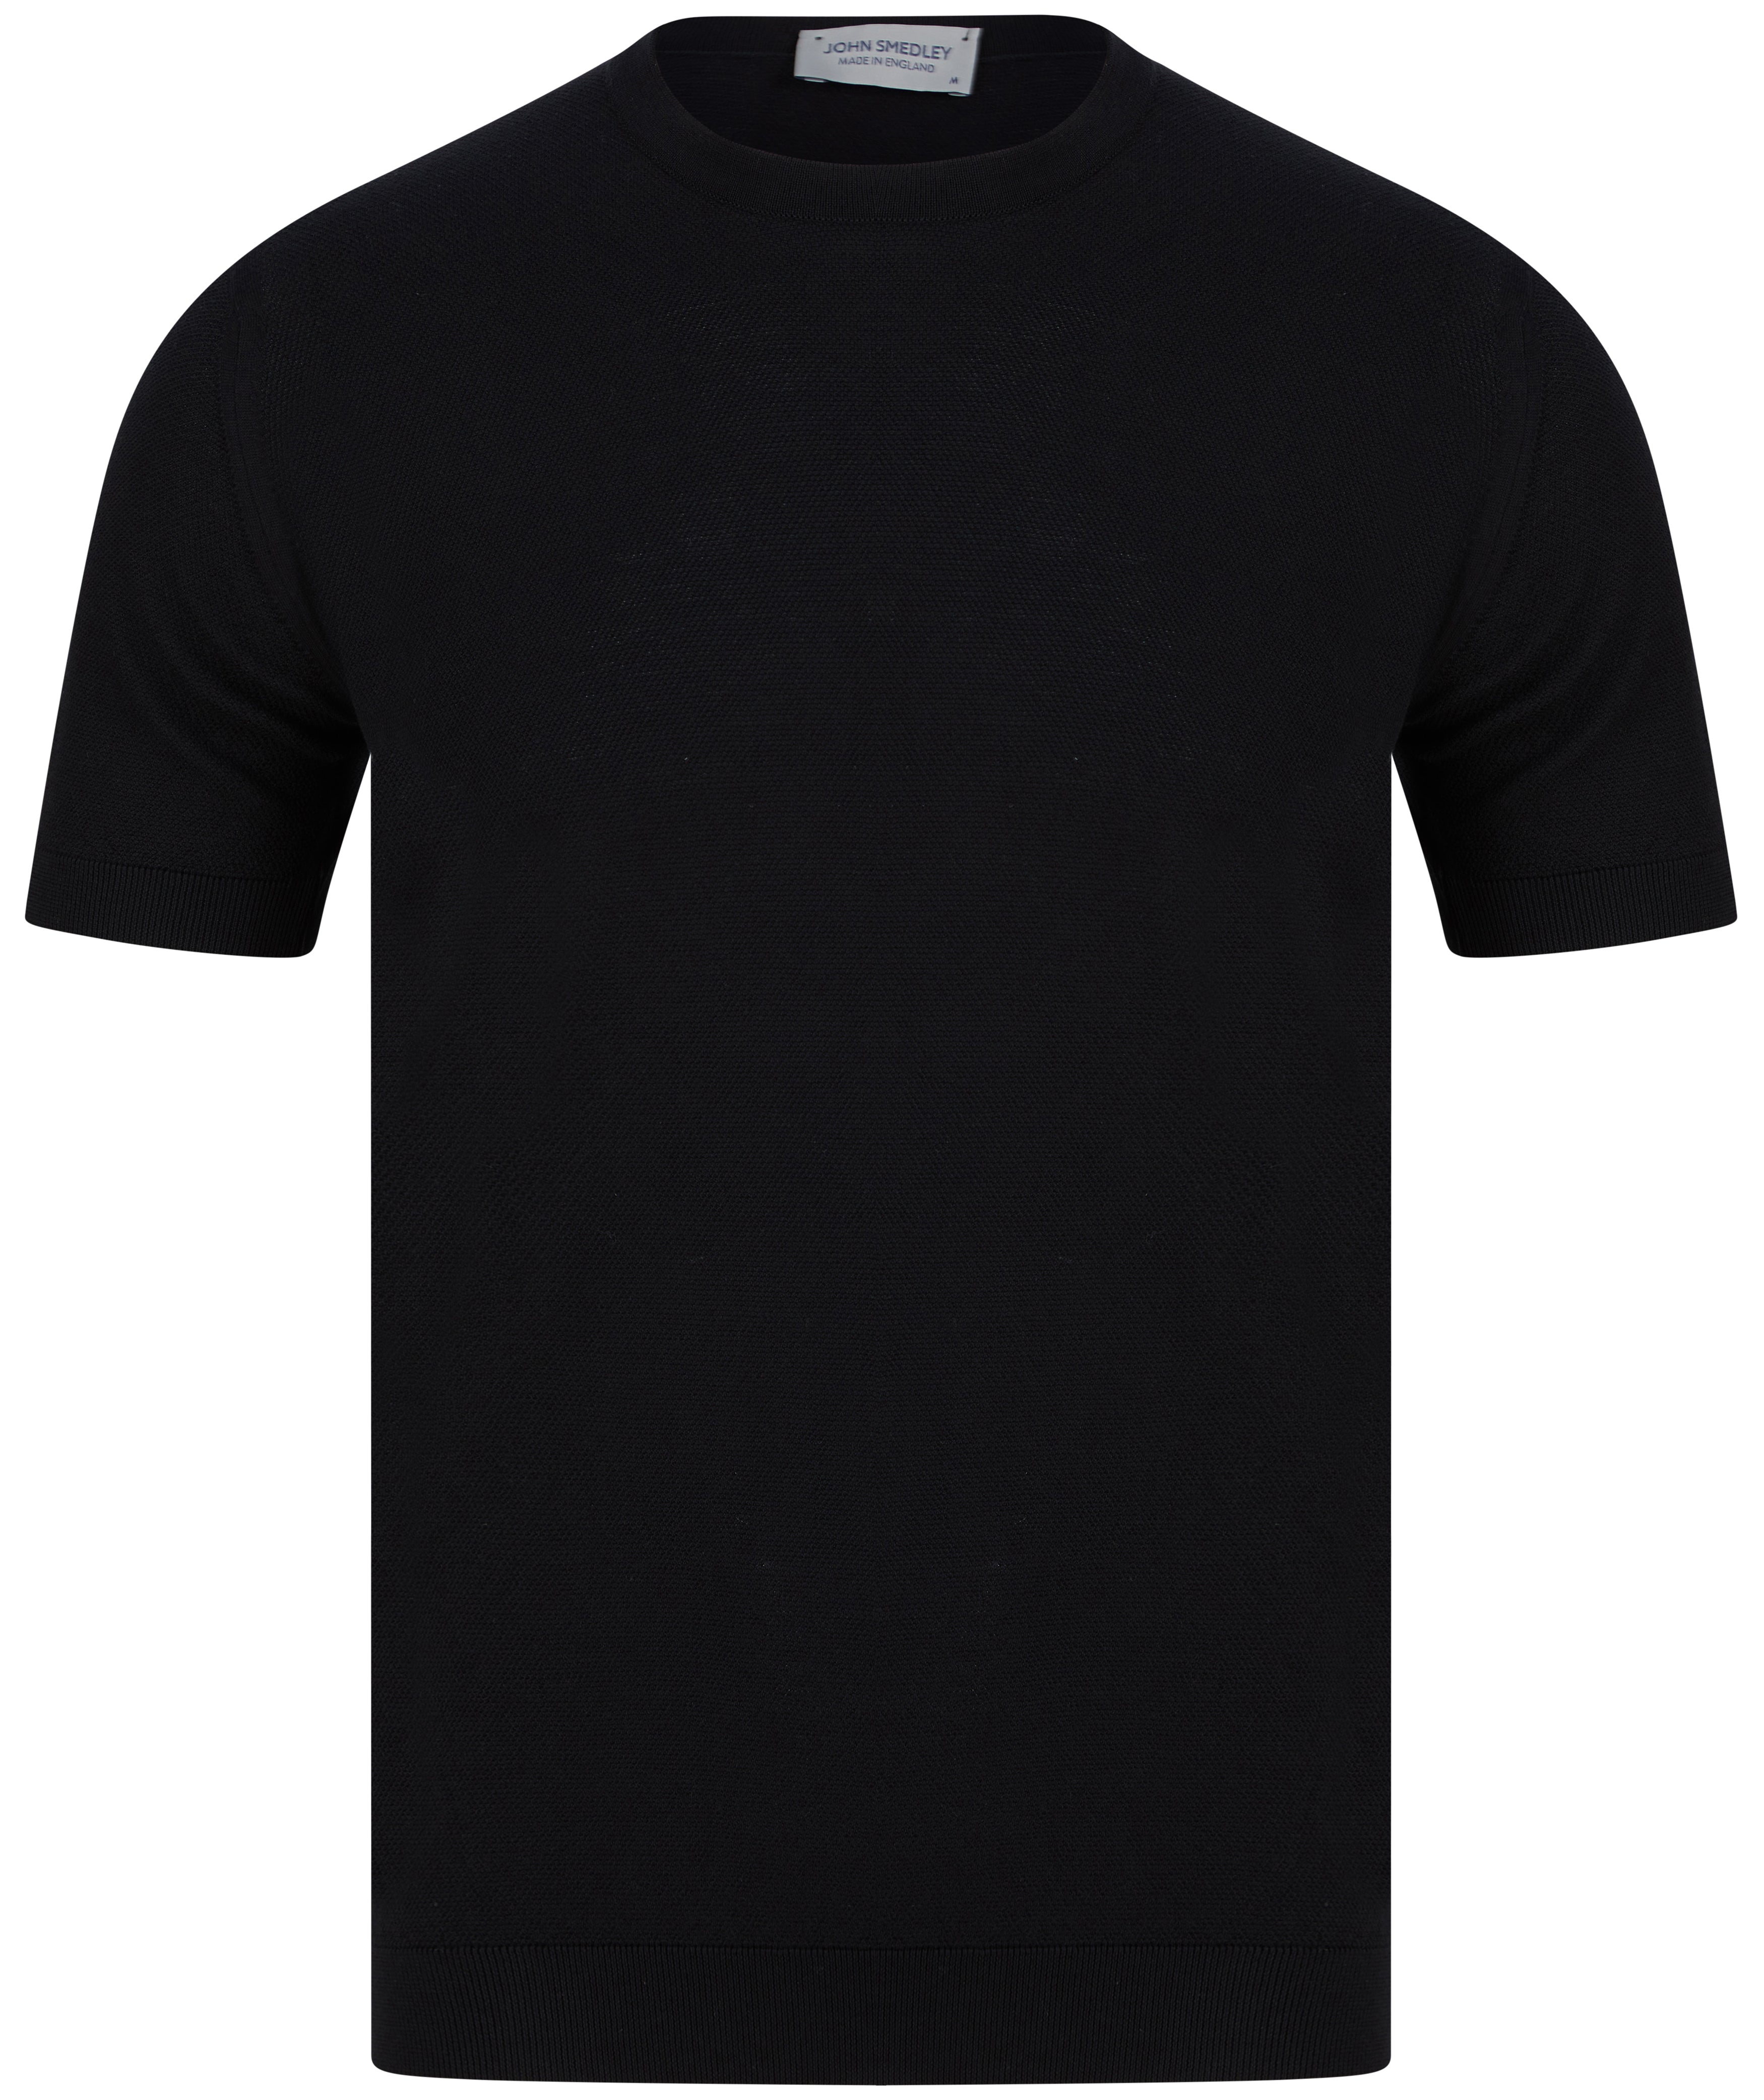 Load image into Gallery viewer, John Smedley Park Black T Shirt
